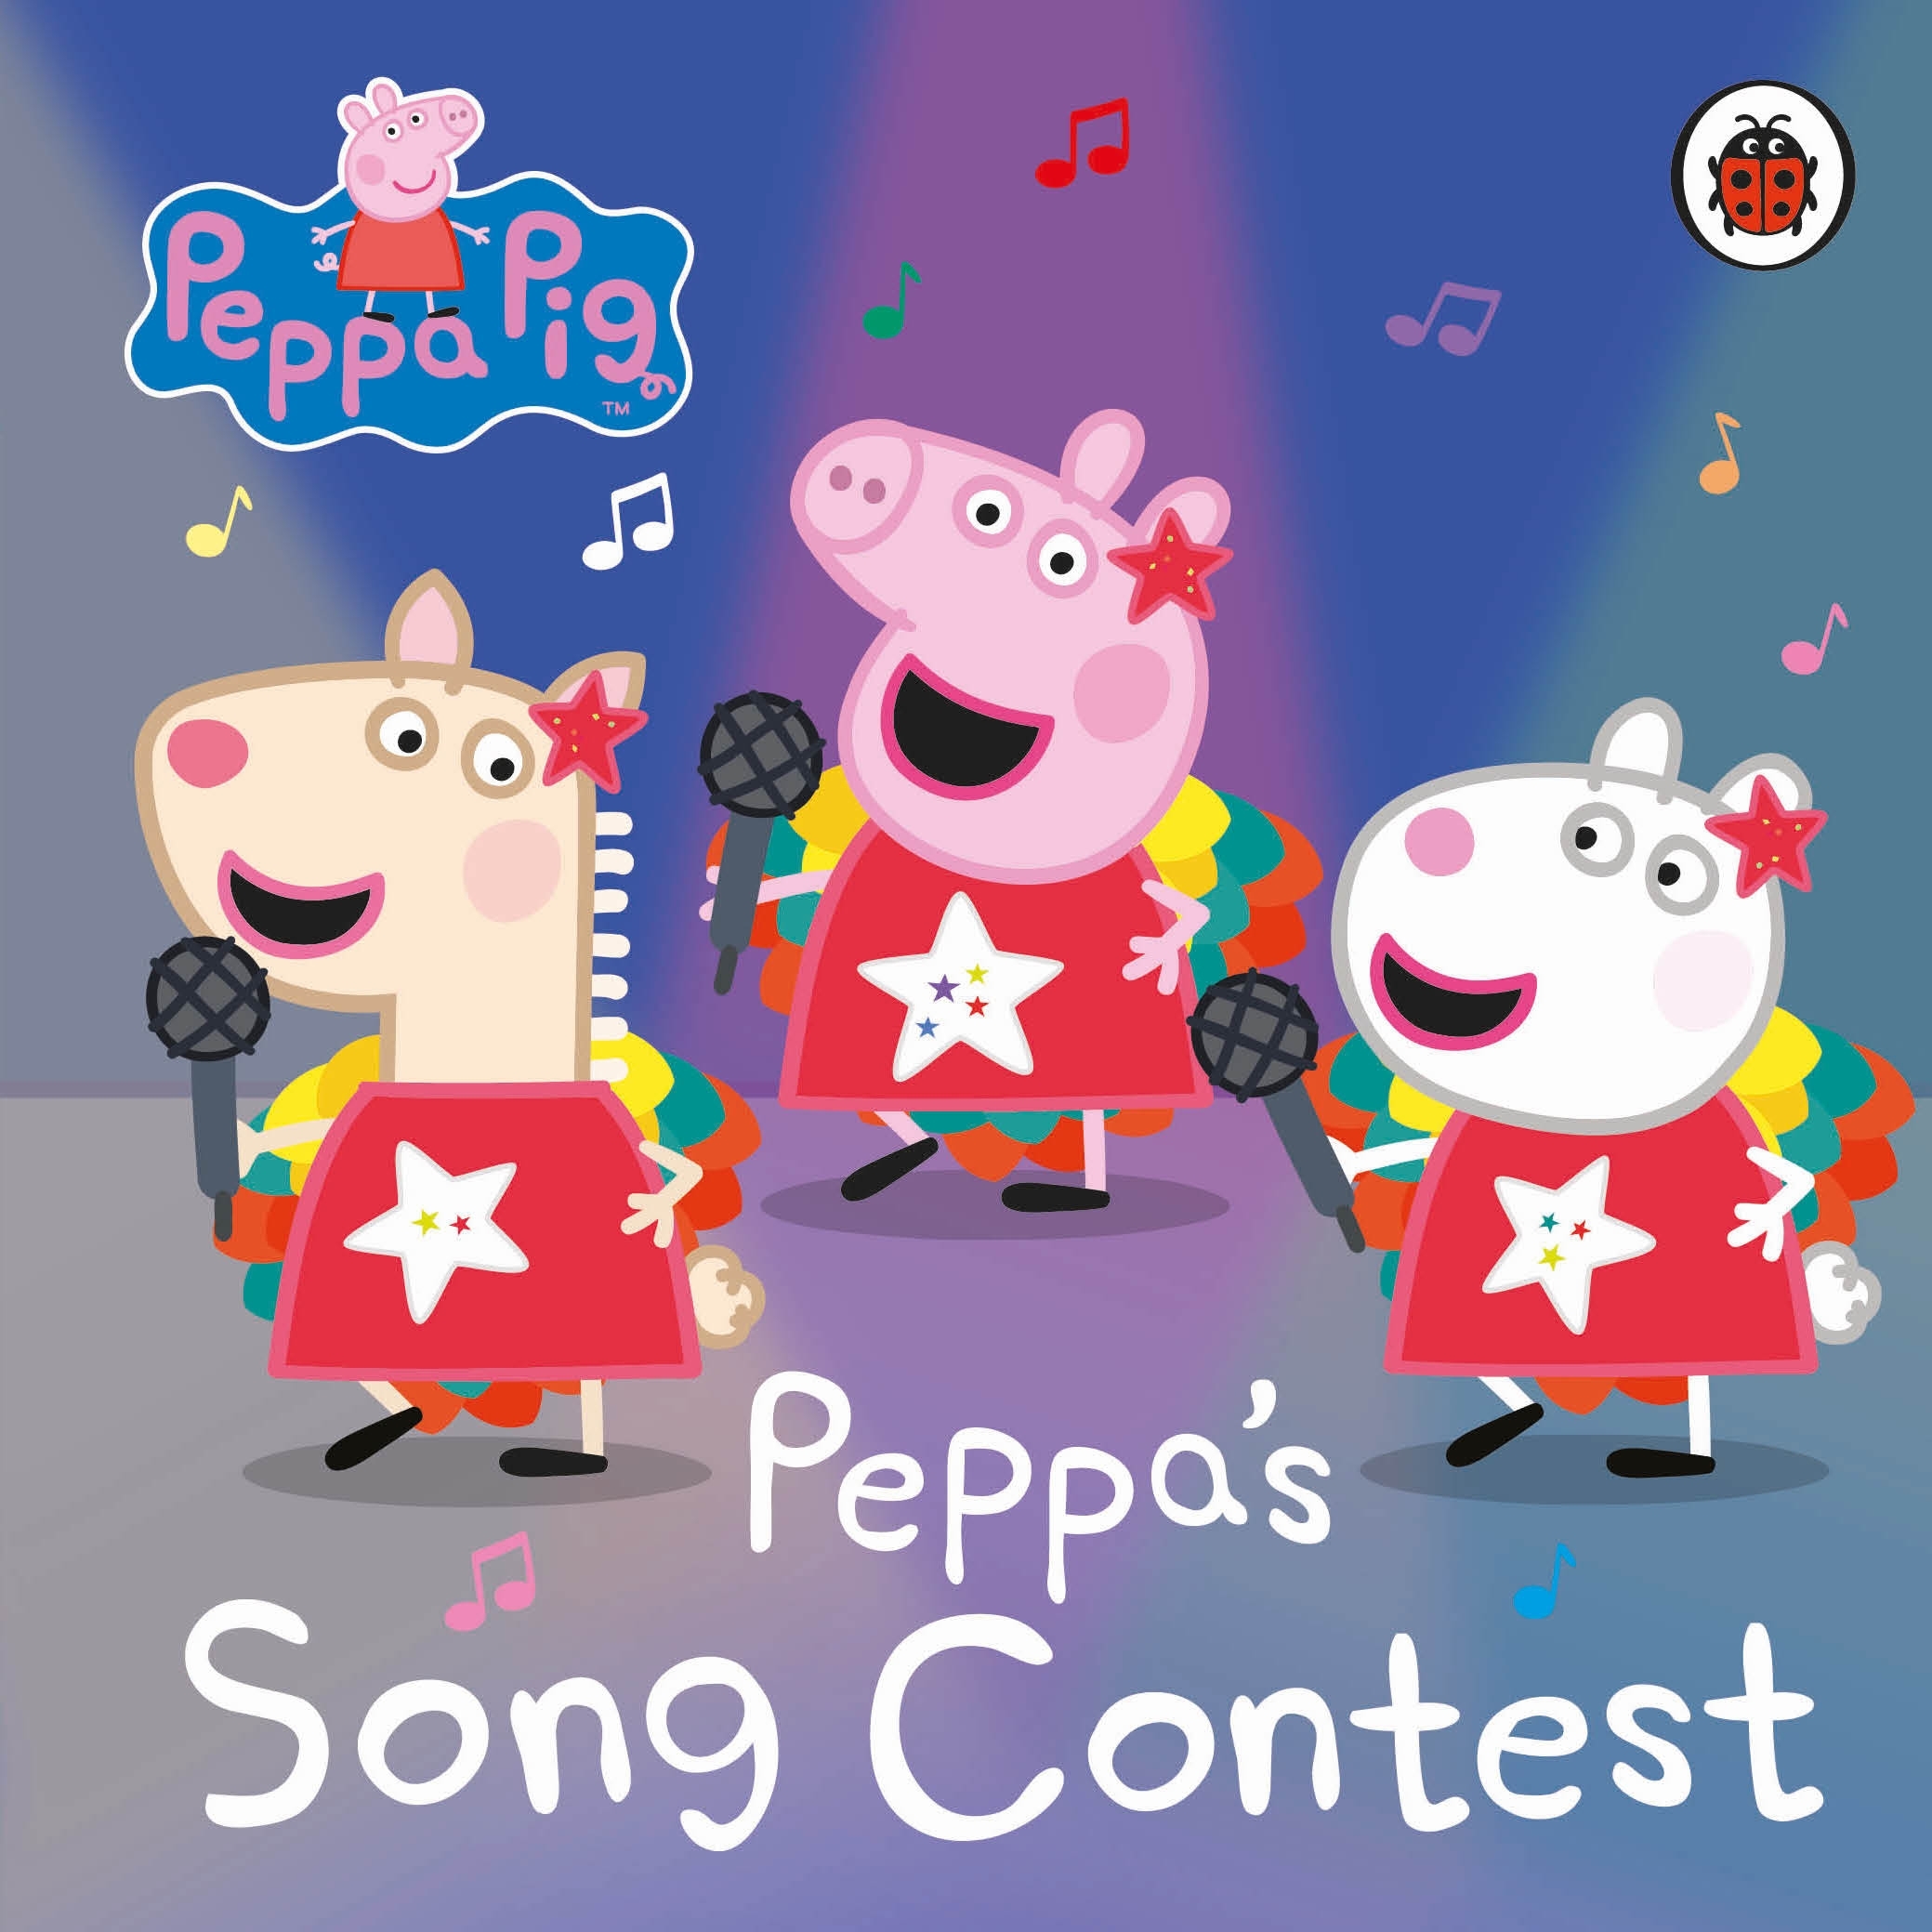 Peppa Pig: Peppa's Song Contest by Peppa Pig - Penguin Books Australia